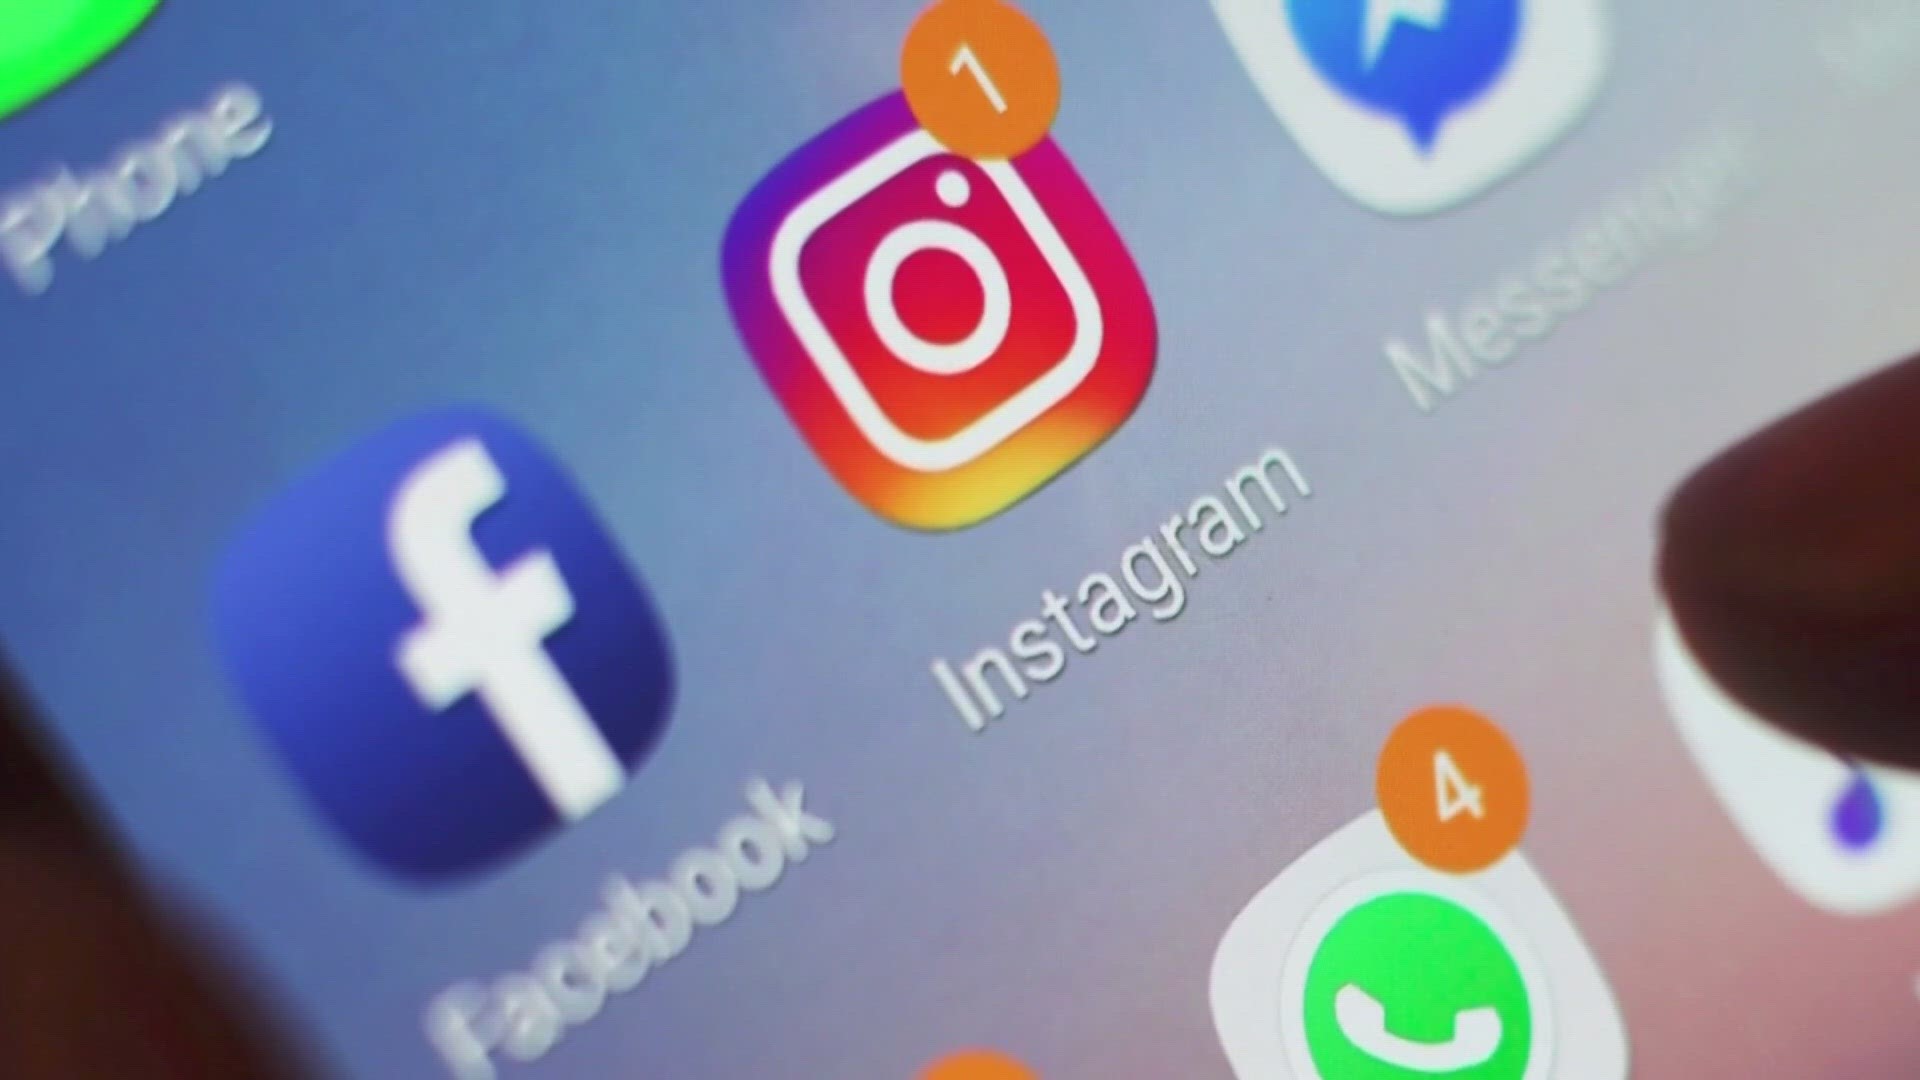 The law requires social media companies to obtain a parent’s permission for children under 16 to sign up for social media and gaming apps.